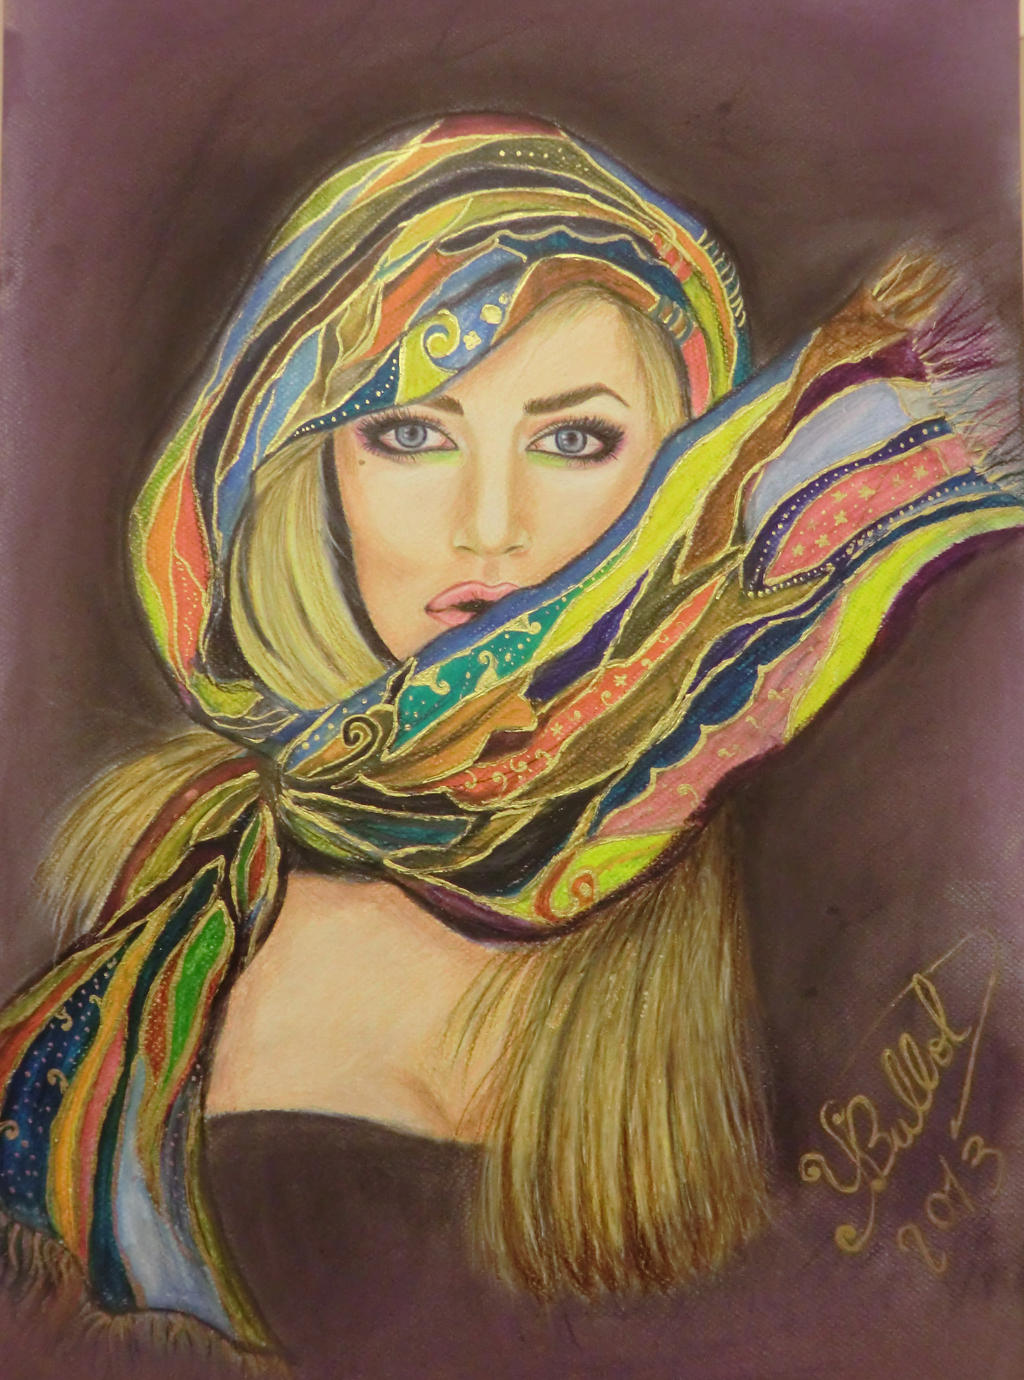 Woman With Scarf by Yasminesweet on DeviantArt